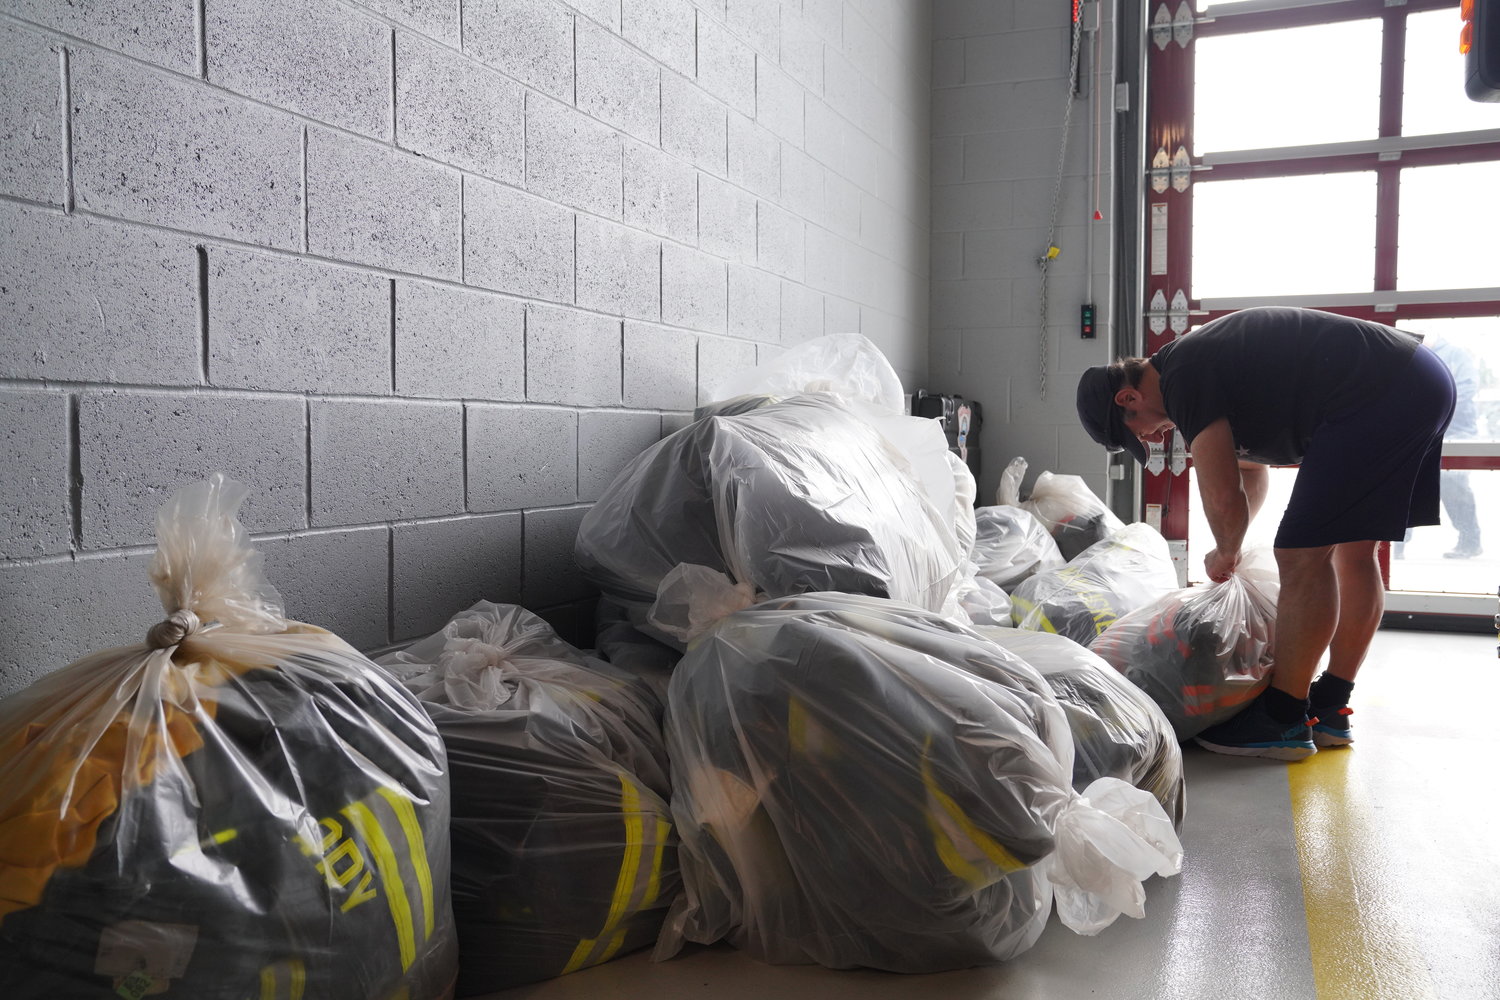 Nantucket Fire Department's old turnout gear, containing high levels of PFAS, is bagged up in the Fairgrounds Road firehouse.